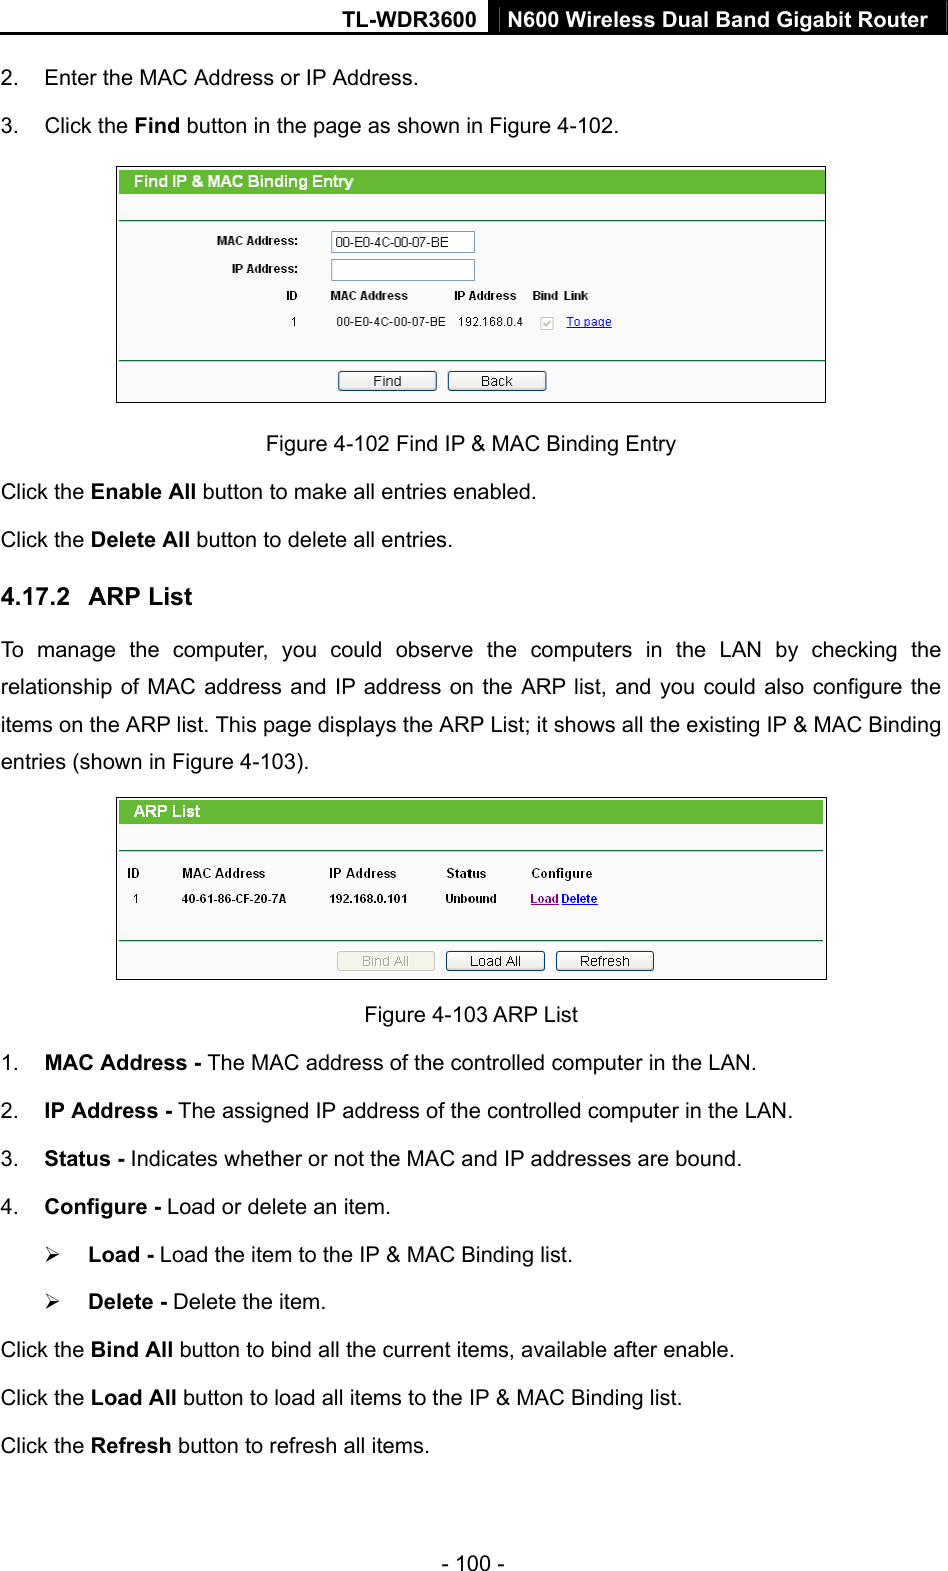 TL-WDR3600 N600 Wireless Dual Band Gigabit Router  - 100 - 2.  Enter the MAC Address or IP Address. 3. Click the Find button in the page as shown in Figure 4-102.  Figure 4-102 Find IP &amp; MAC Binding Entry Click the Enable All button to make all entries enabled. Click the Delete All button to delete all entries. 4.17.2  ARP List To manage the computer, you could observe the computers in the LAN by checking the relationship of MAC address and IP address on the ARP list, and you could also configure the items on the ARP list. This page displays the ARP List; it shows all the existing IP &amp; MAC Binding entries (shown in Figure 4-103).    Figure 4-103 ARP List 1.  MAC Address - The MAC address of the controlled computer in the LAN.   2.  IP Address - The assigned IP address of the controlled computer in the LAN.   3.  Status - Indicates whether or not the MAC and IP addresses are bound. 4.  Configure - Load or delete an item.   ¾ Load - Load the item to the IP &amp; MAC Binding list.   ¾ Delete - Delete the item.   Click the Bind All button to bind all the current items, available after enable. Click the Load All button to load all items to the IP &amp; MAC Binding list. Click the Refresh button to refresh all items. 